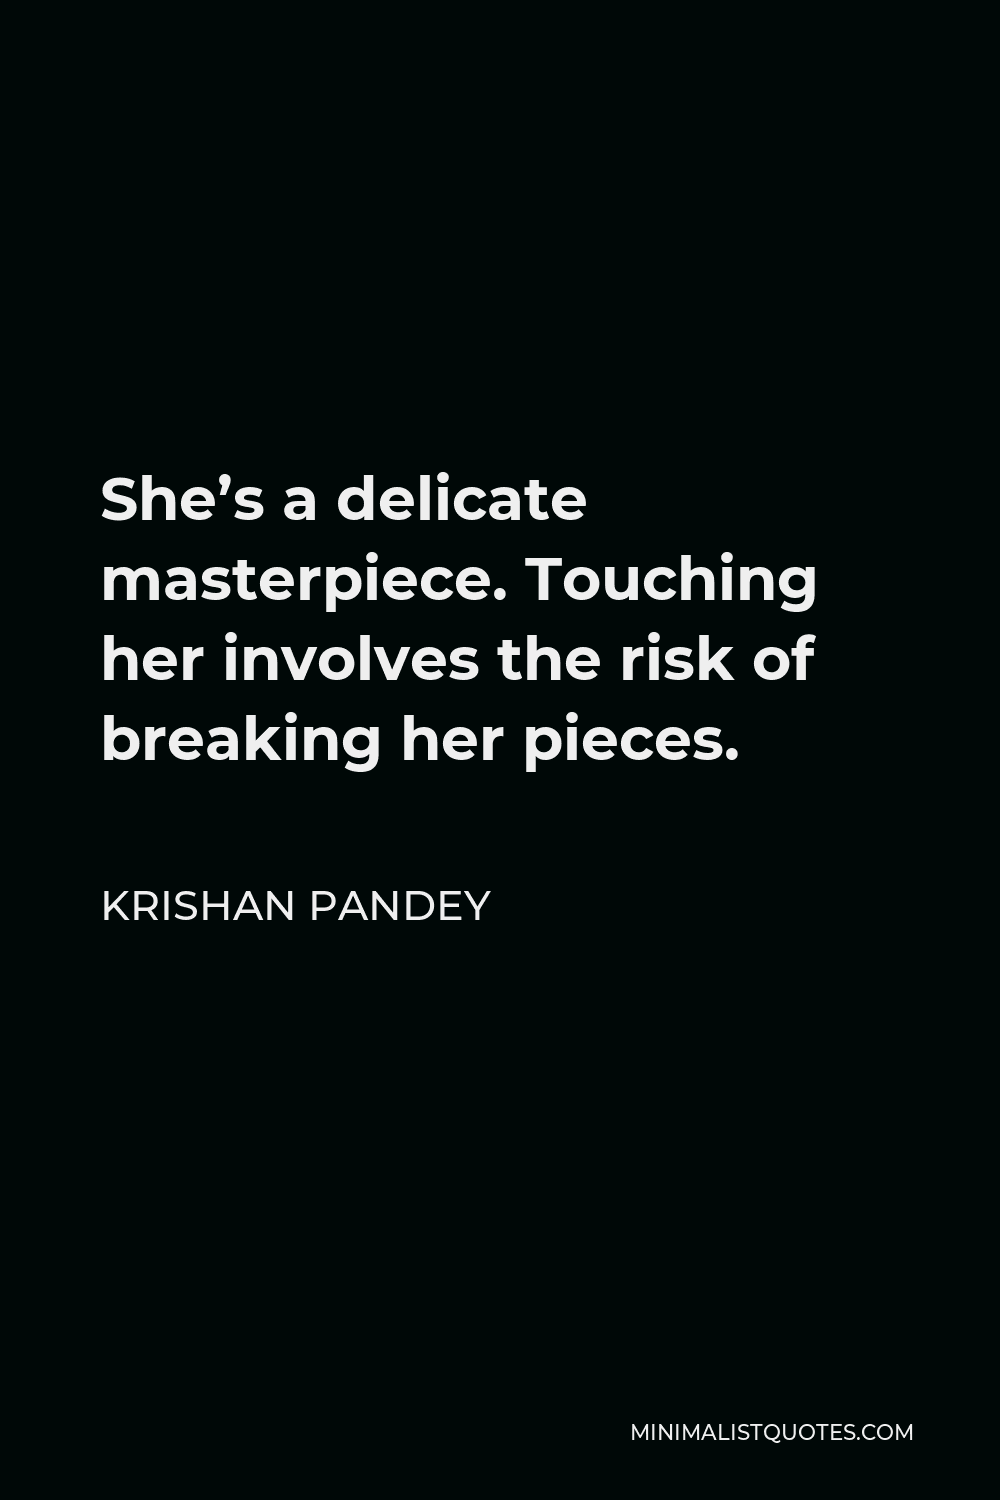 Krishan Pandey Quote - She’s a delicate masterpiece. Touching her involves the risk of breaking her pieces.